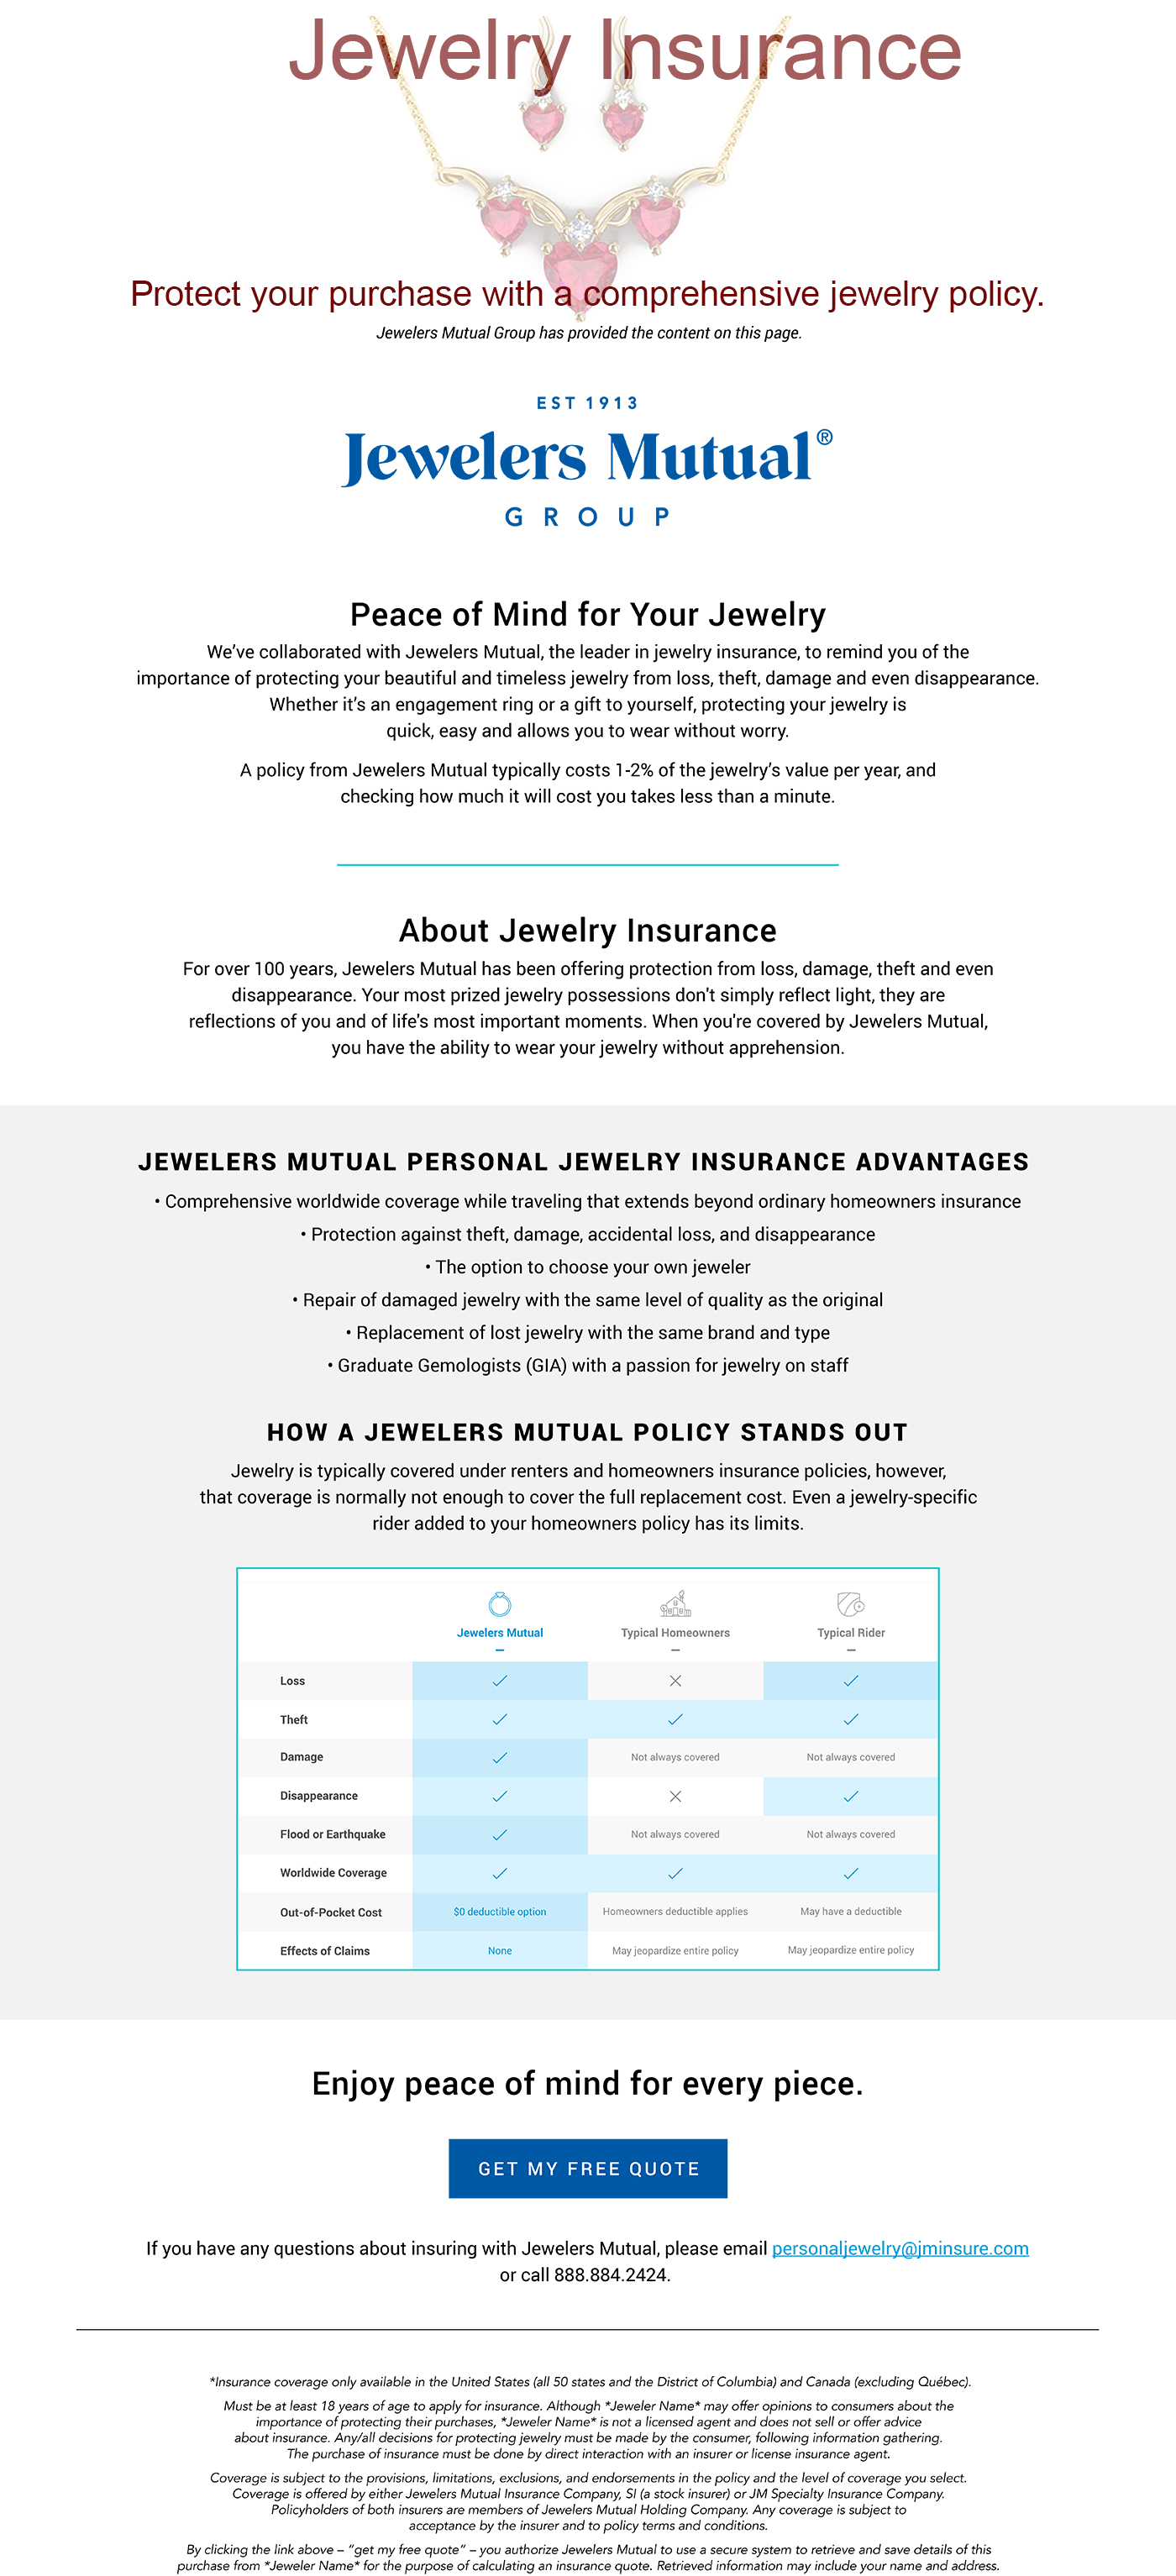 Protect your jewelry purchase with jewelry insurance